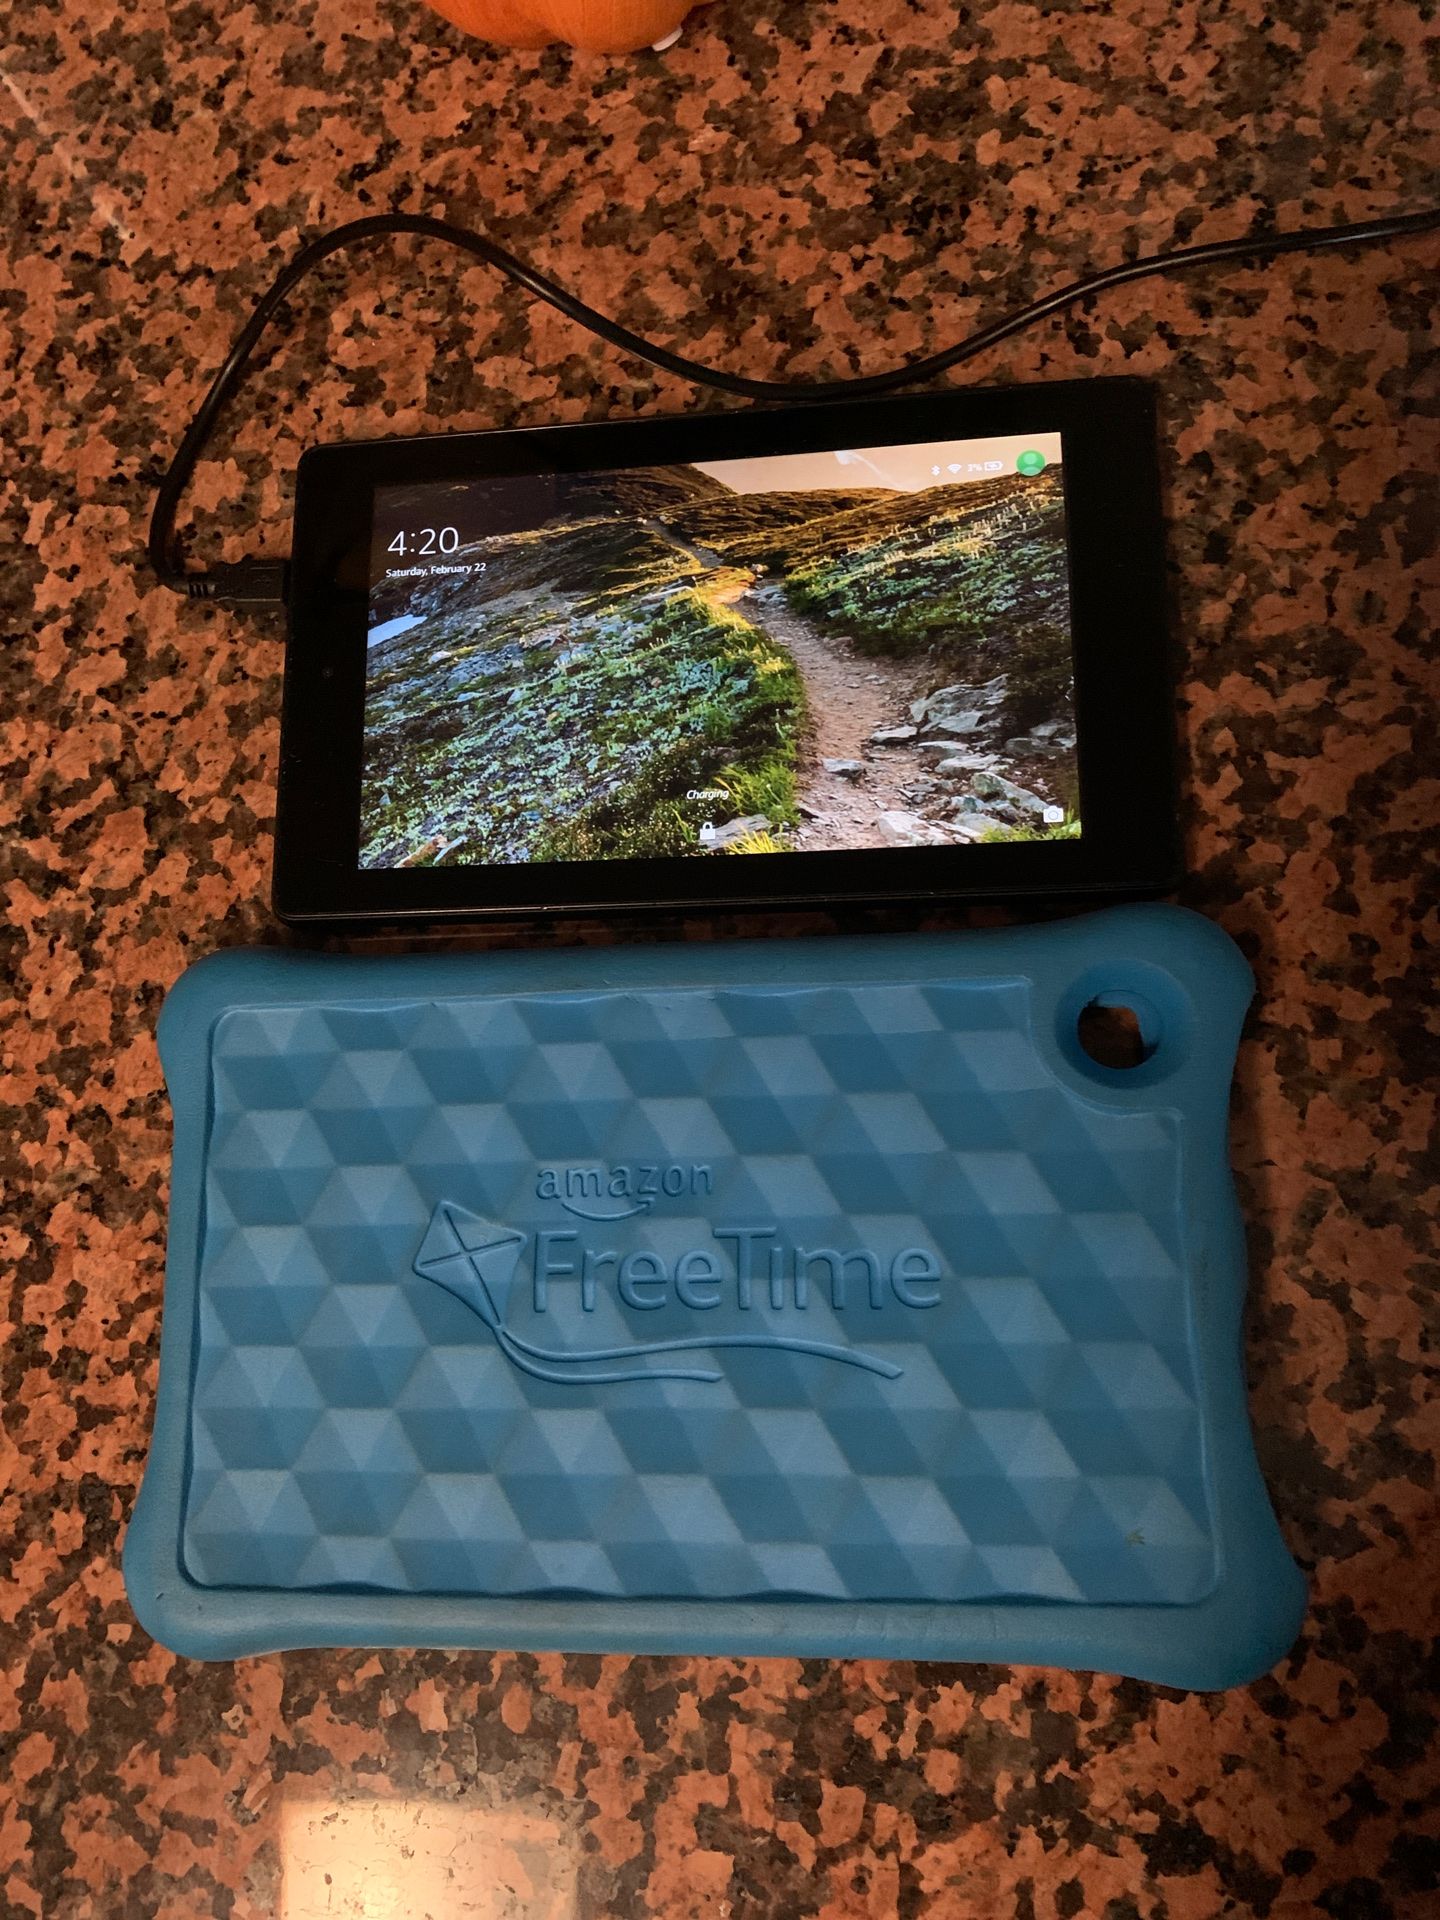 Kindle 7th gen tablet with kids case must go today!